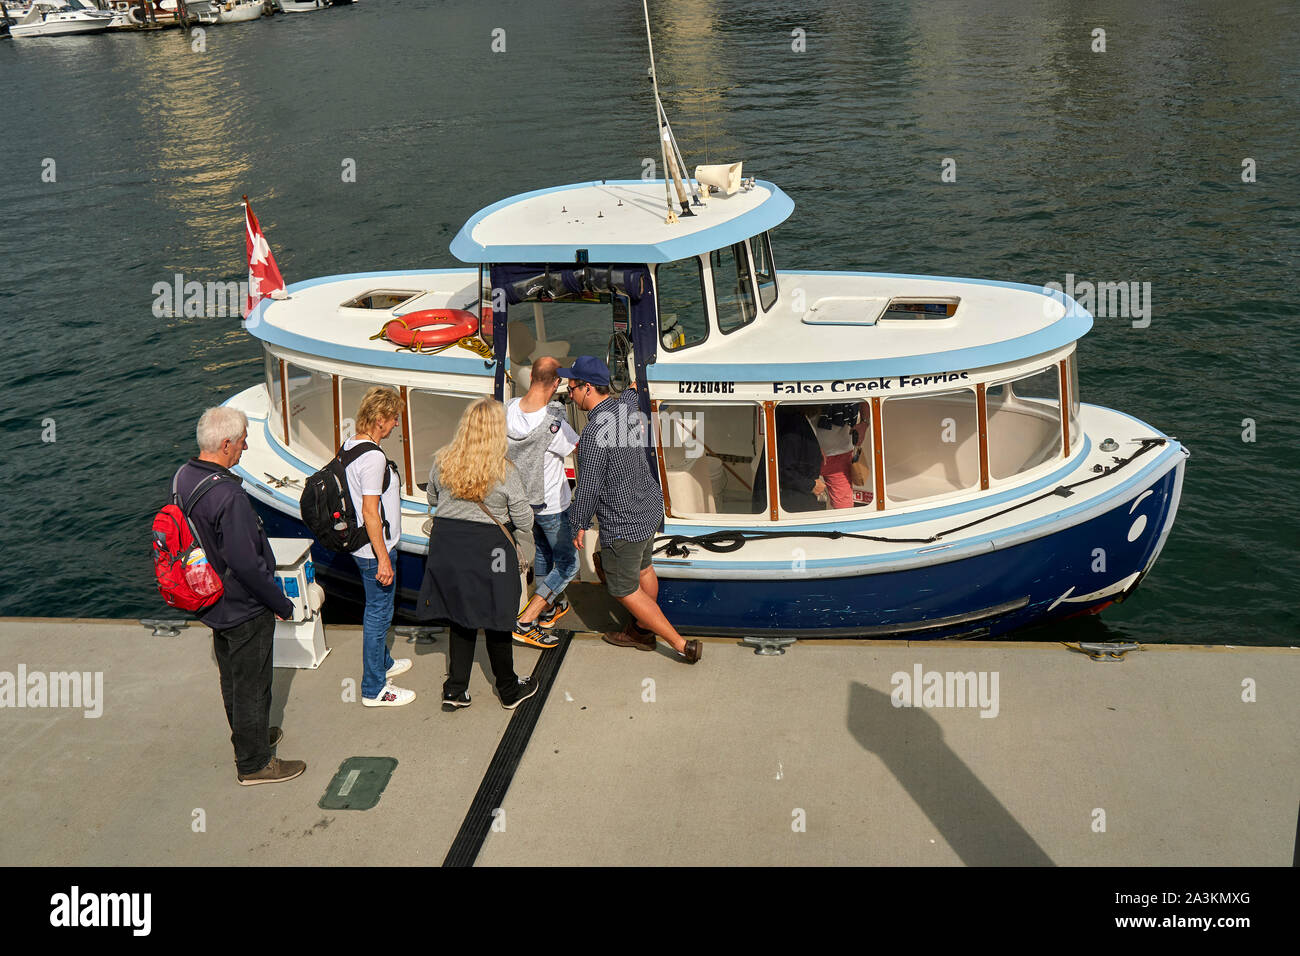 A view of a ferry boat loading passengers, Granville Island, Vancouver Stock Photo